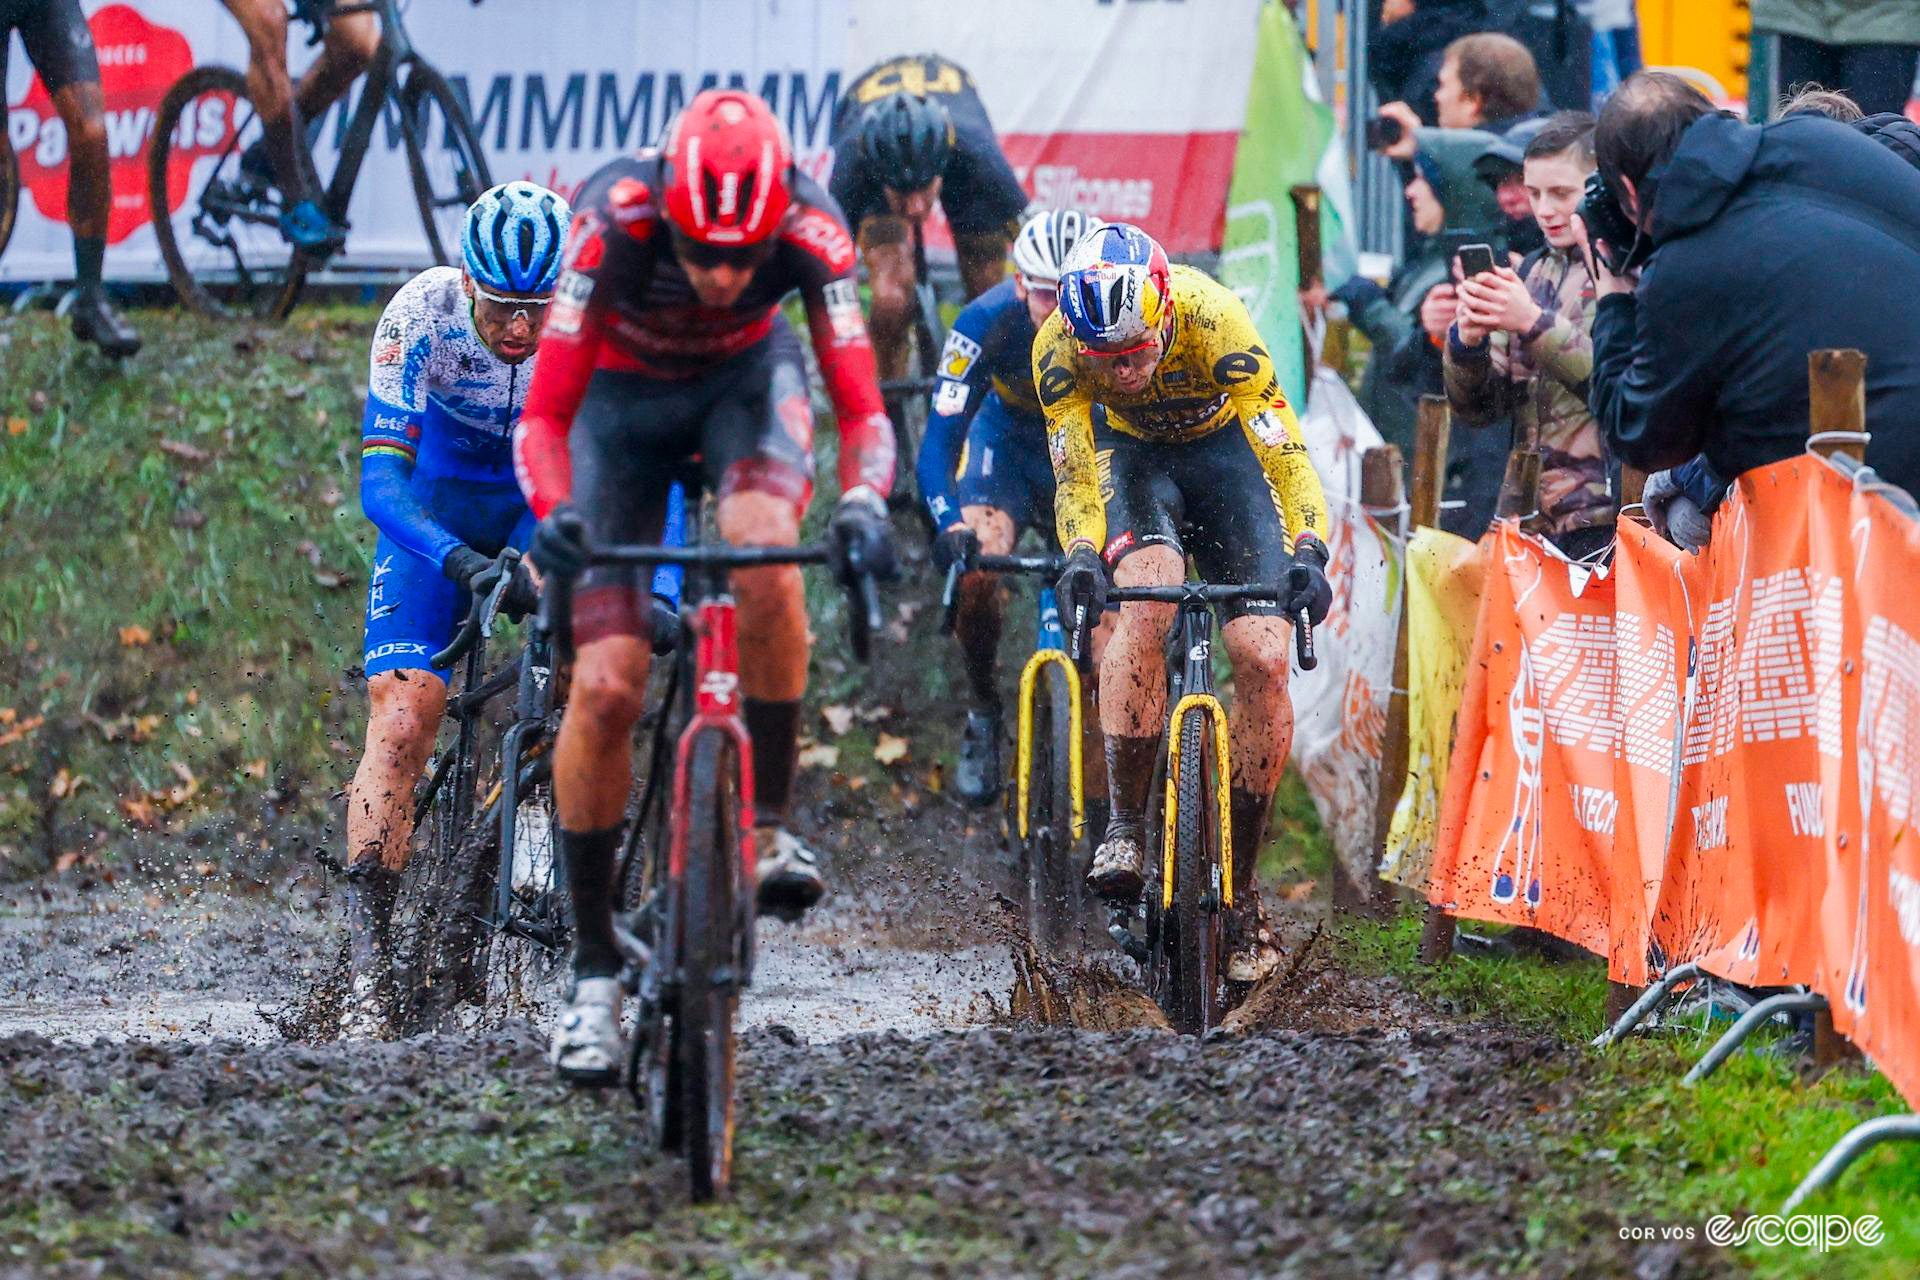 The elite men's front group ride through a muddy puddle during a very wet Exact Cross Essen.